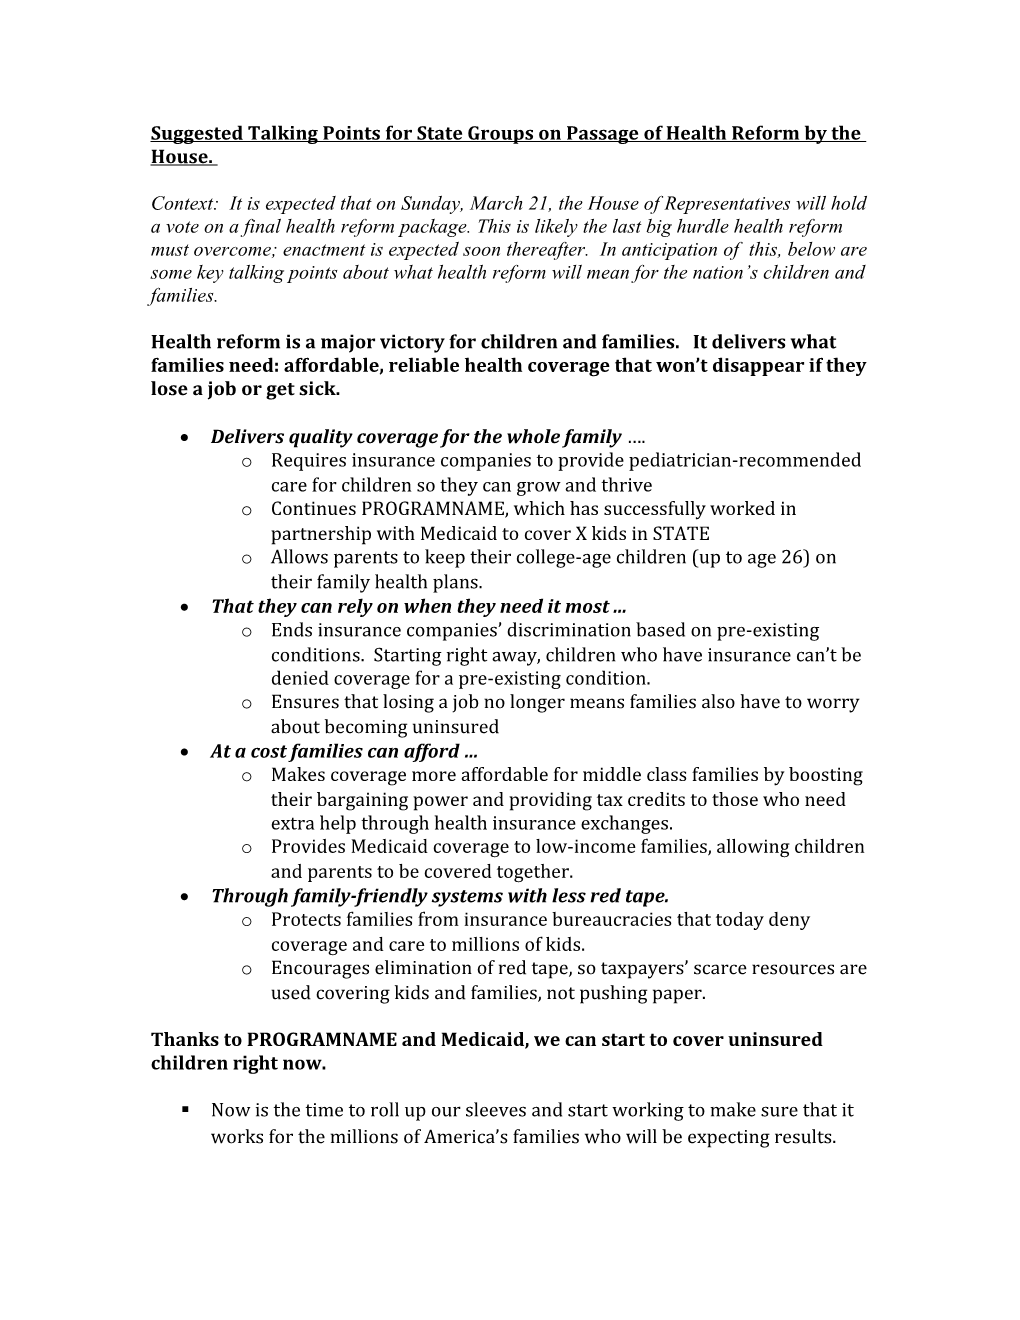 Suggested Talking Points for State Groups on Passage of Health Reform by the House